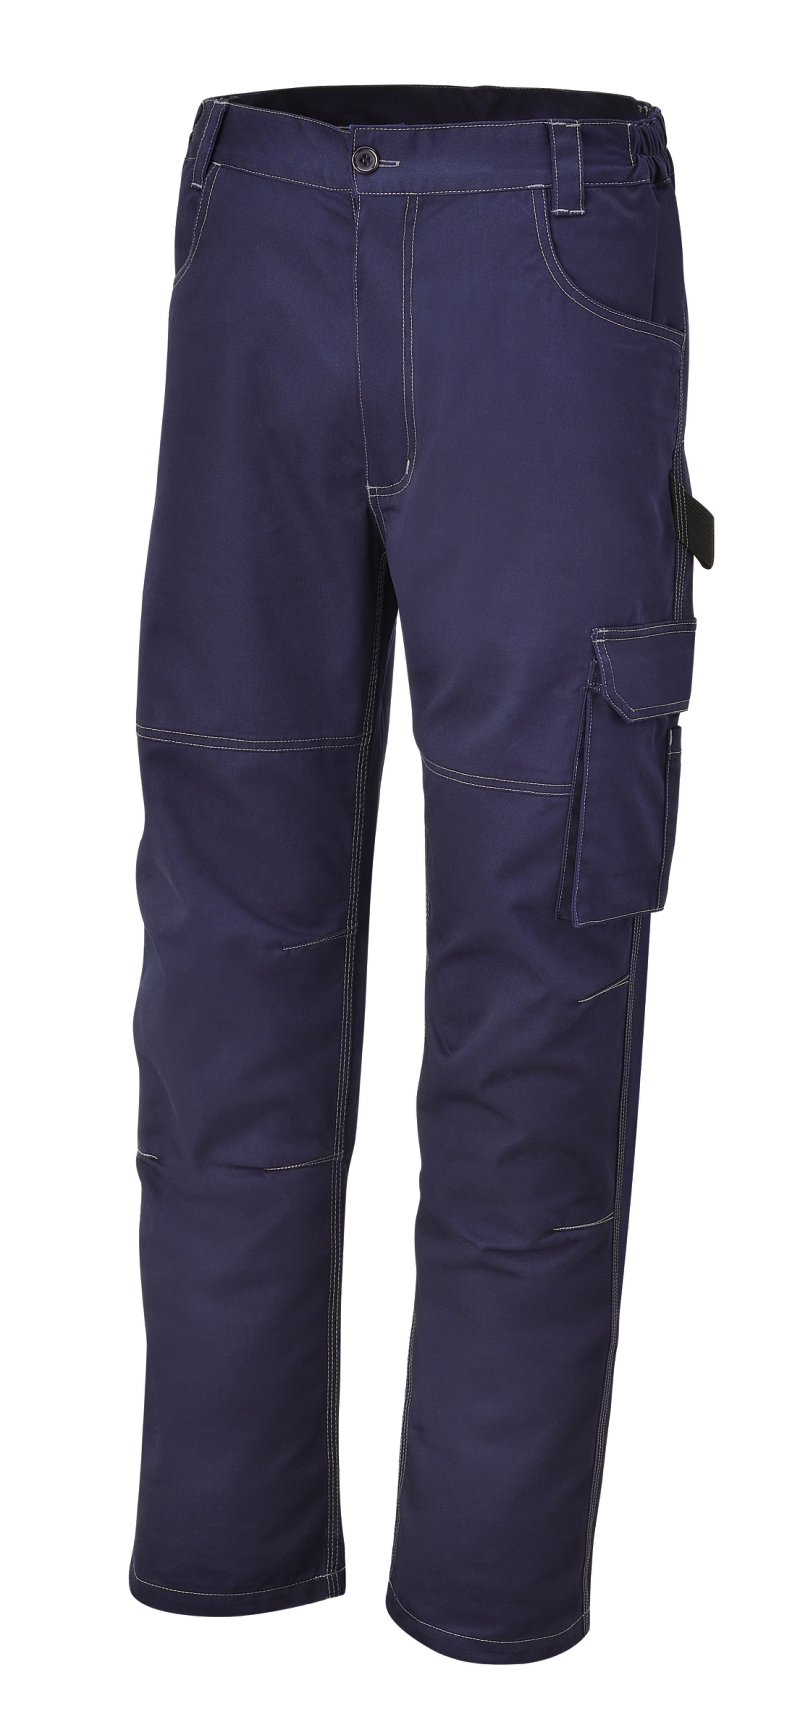 Work trousers, T/C twill, 245 g/m2, blue category image